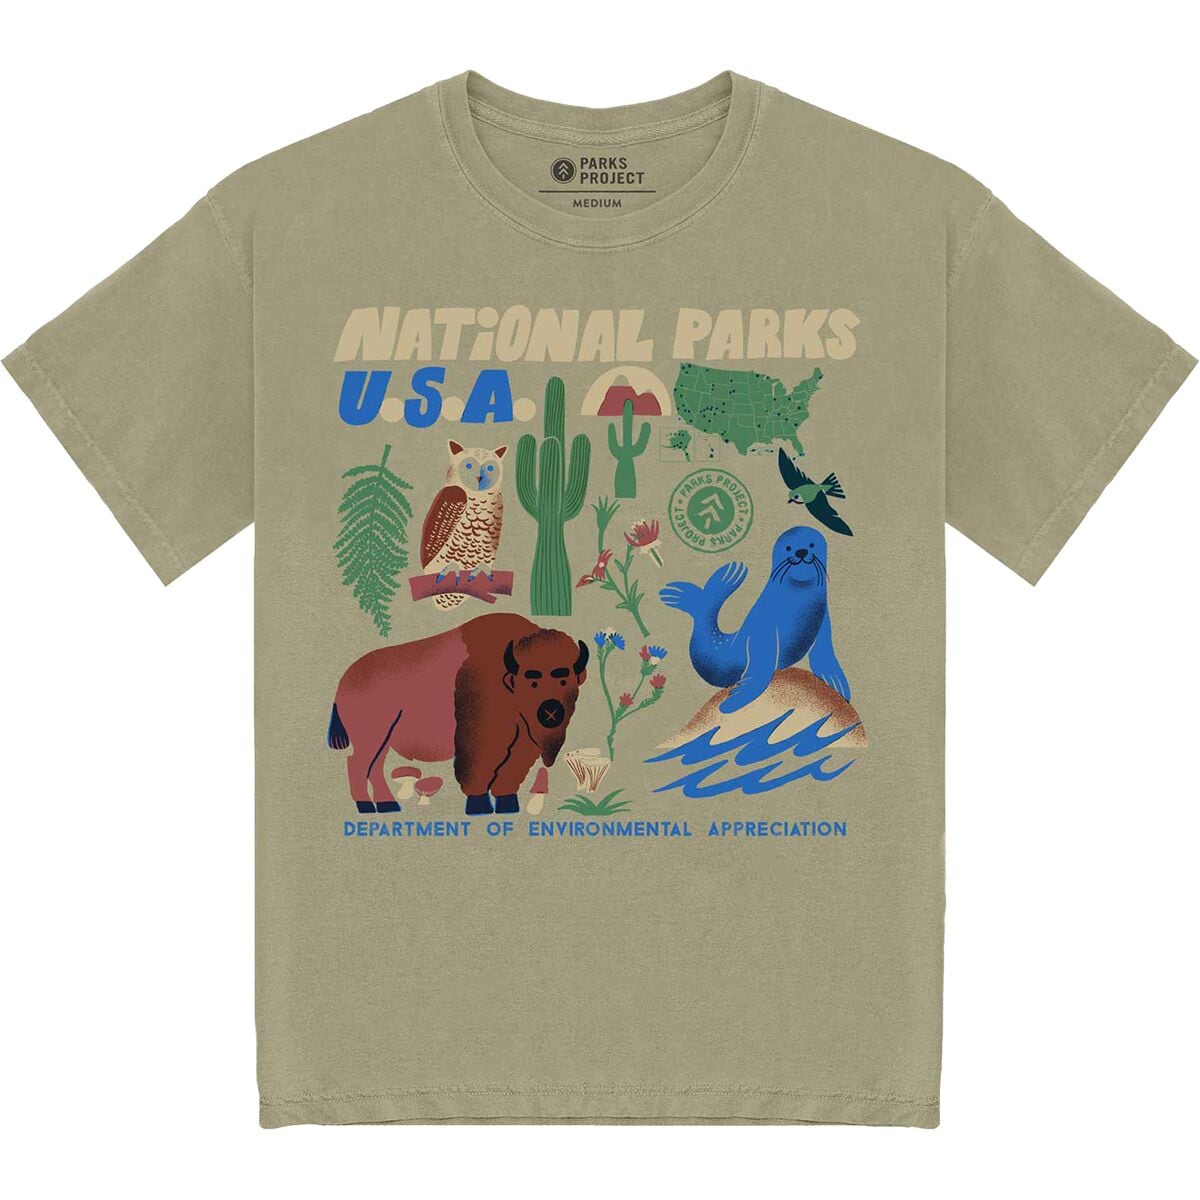 Parks Project National Parks of the USA Organic - Clothing